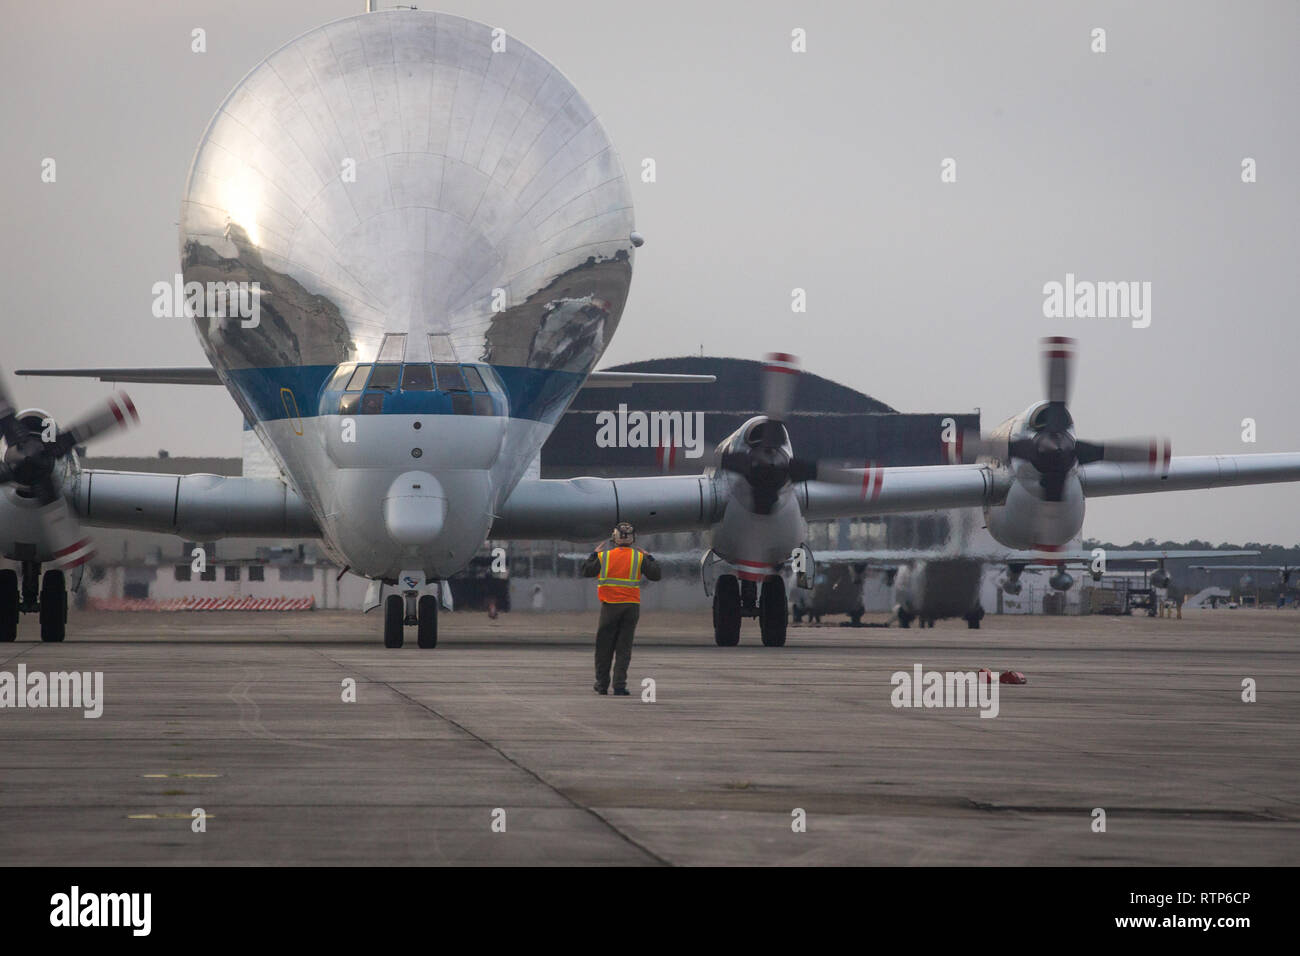 The National Aeronautics and Space Administration’s (NASA) B-377-SG/SGT Super Guppy Turbine cargo aircraft is taxied across the flight line at Marine Corps Air Station Cherry Point, North Carolina, Feb. 28, 2019. The Super Guppy is used for hauling outsize cargo components and is currently transporting one of NASA’s space capsules to a separate location for testing. (U.S. Marine Corps photo by Cpl. Micha R. Pierce) Stock Photo